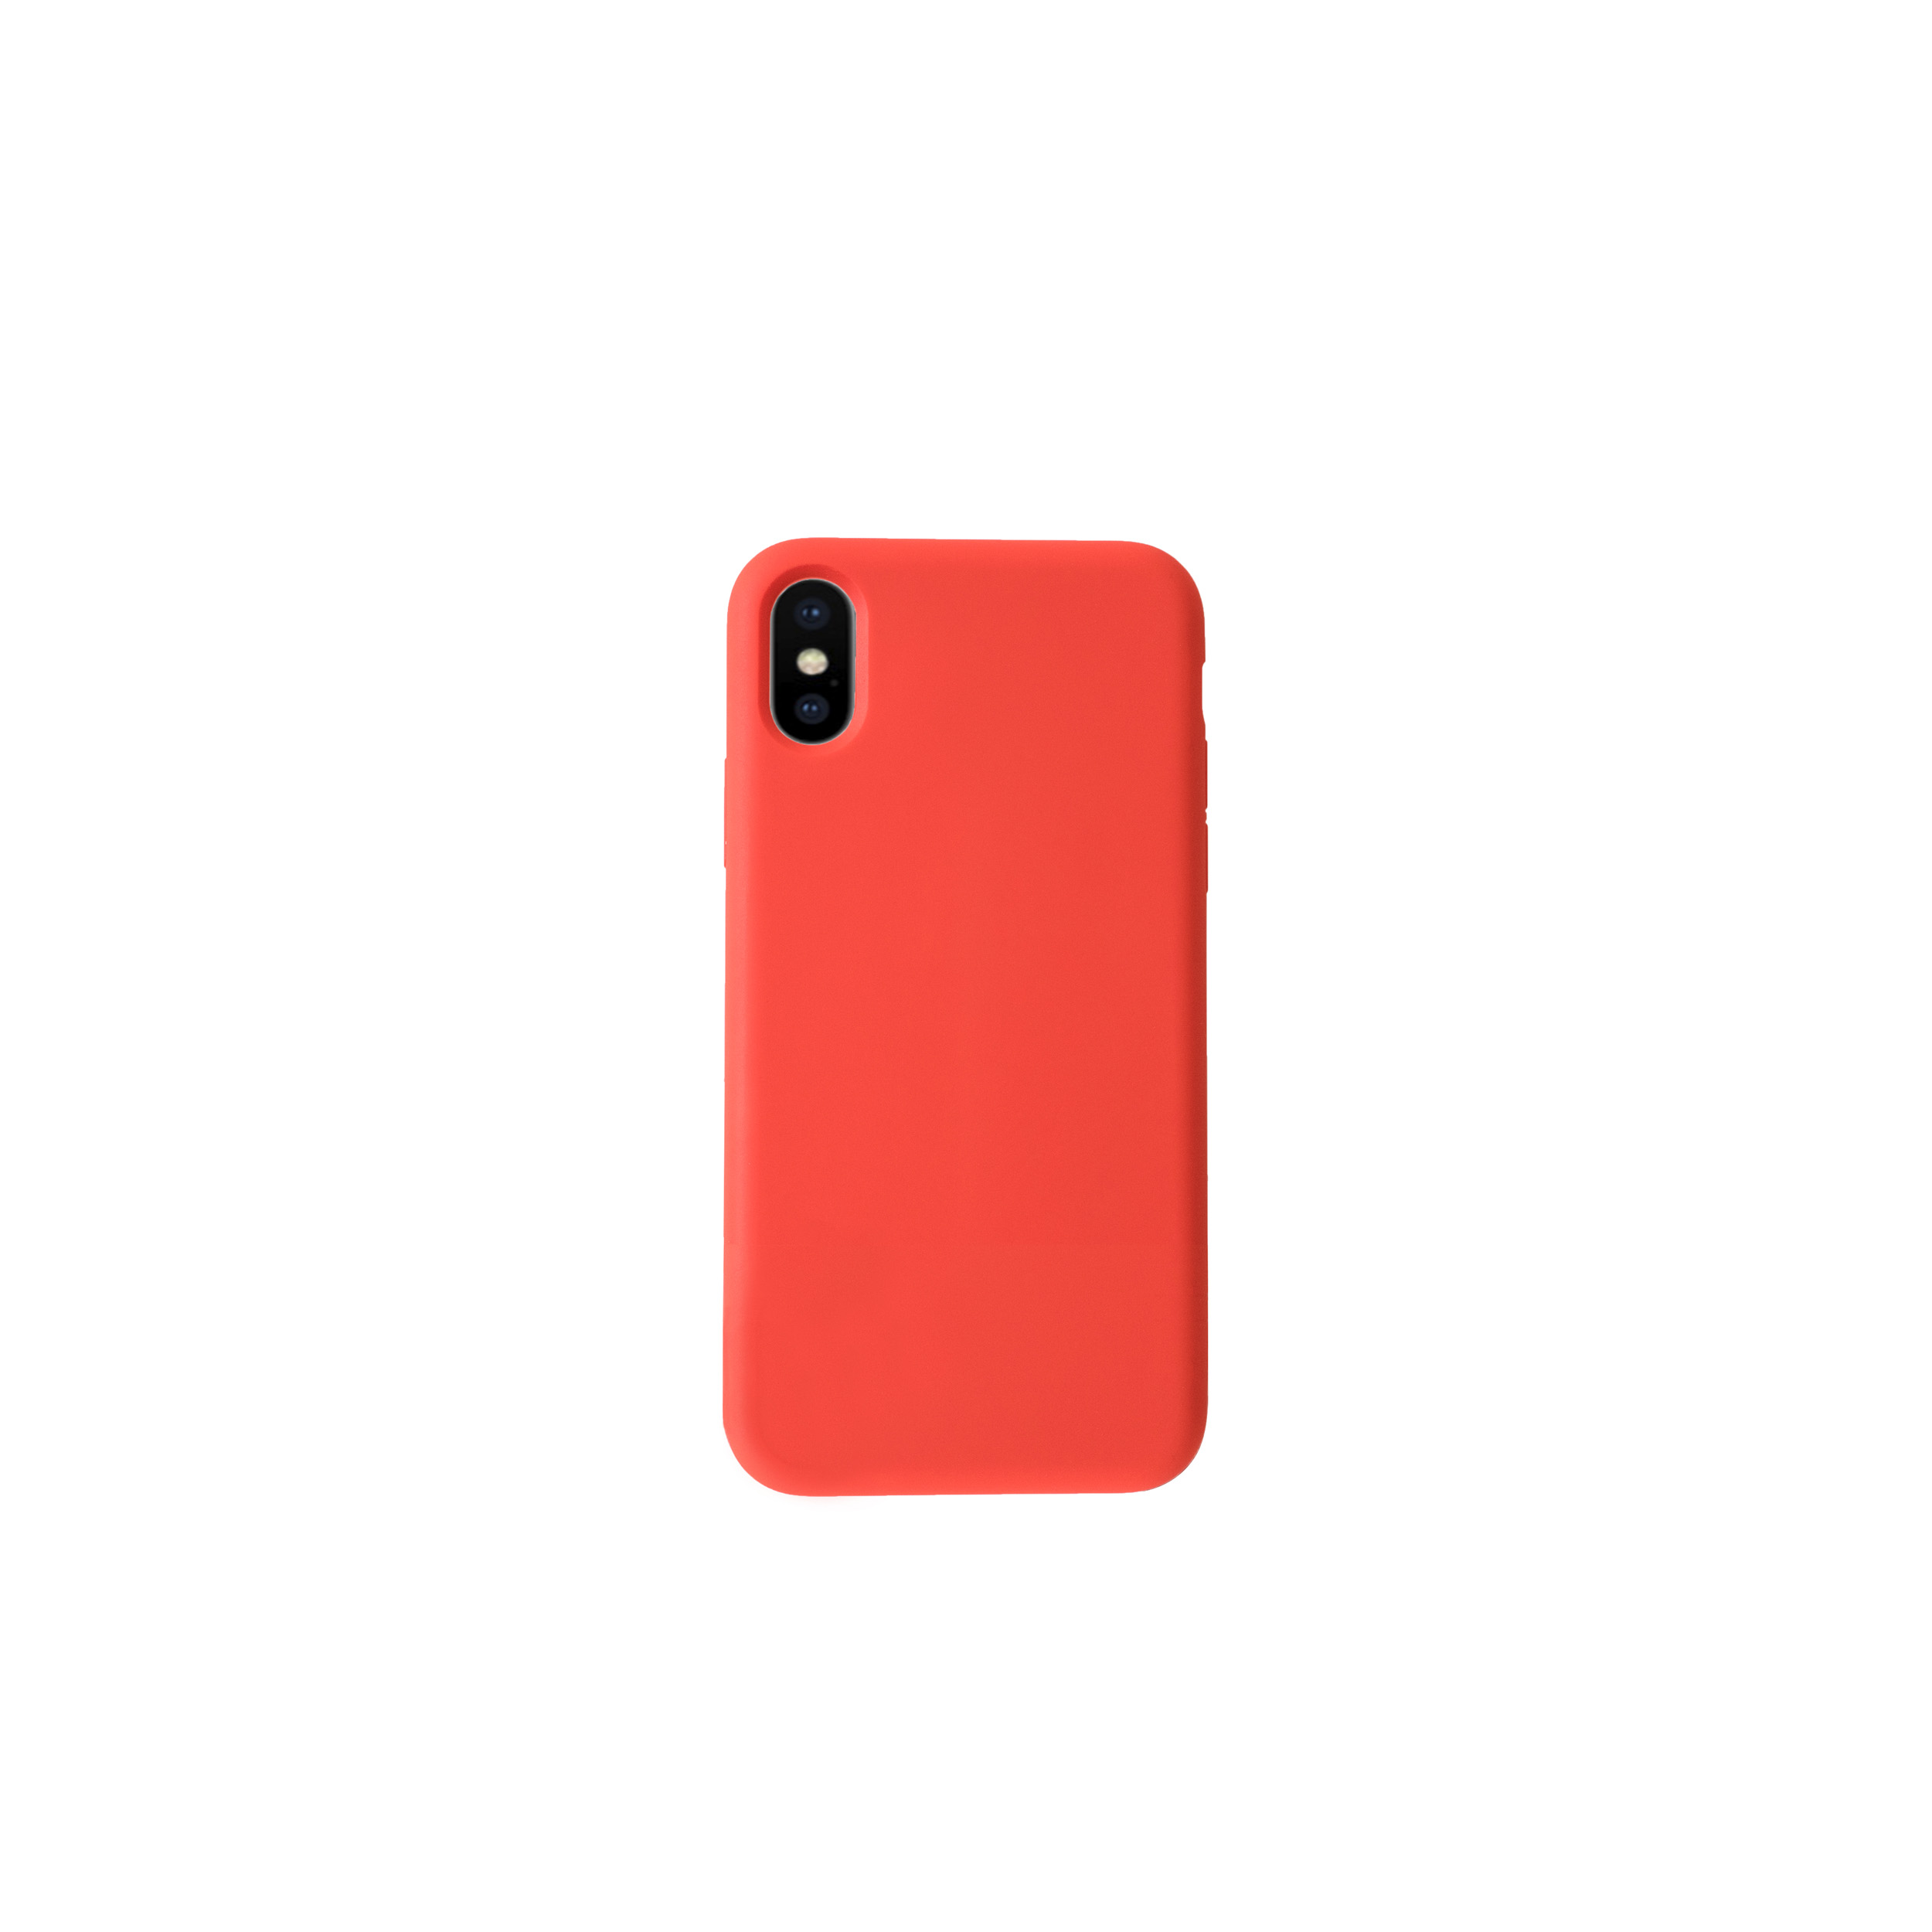 Silikon XS für Max, XS Max KMP Red, iPhone red Schutzhülle Apple, Full iPhone Cover,